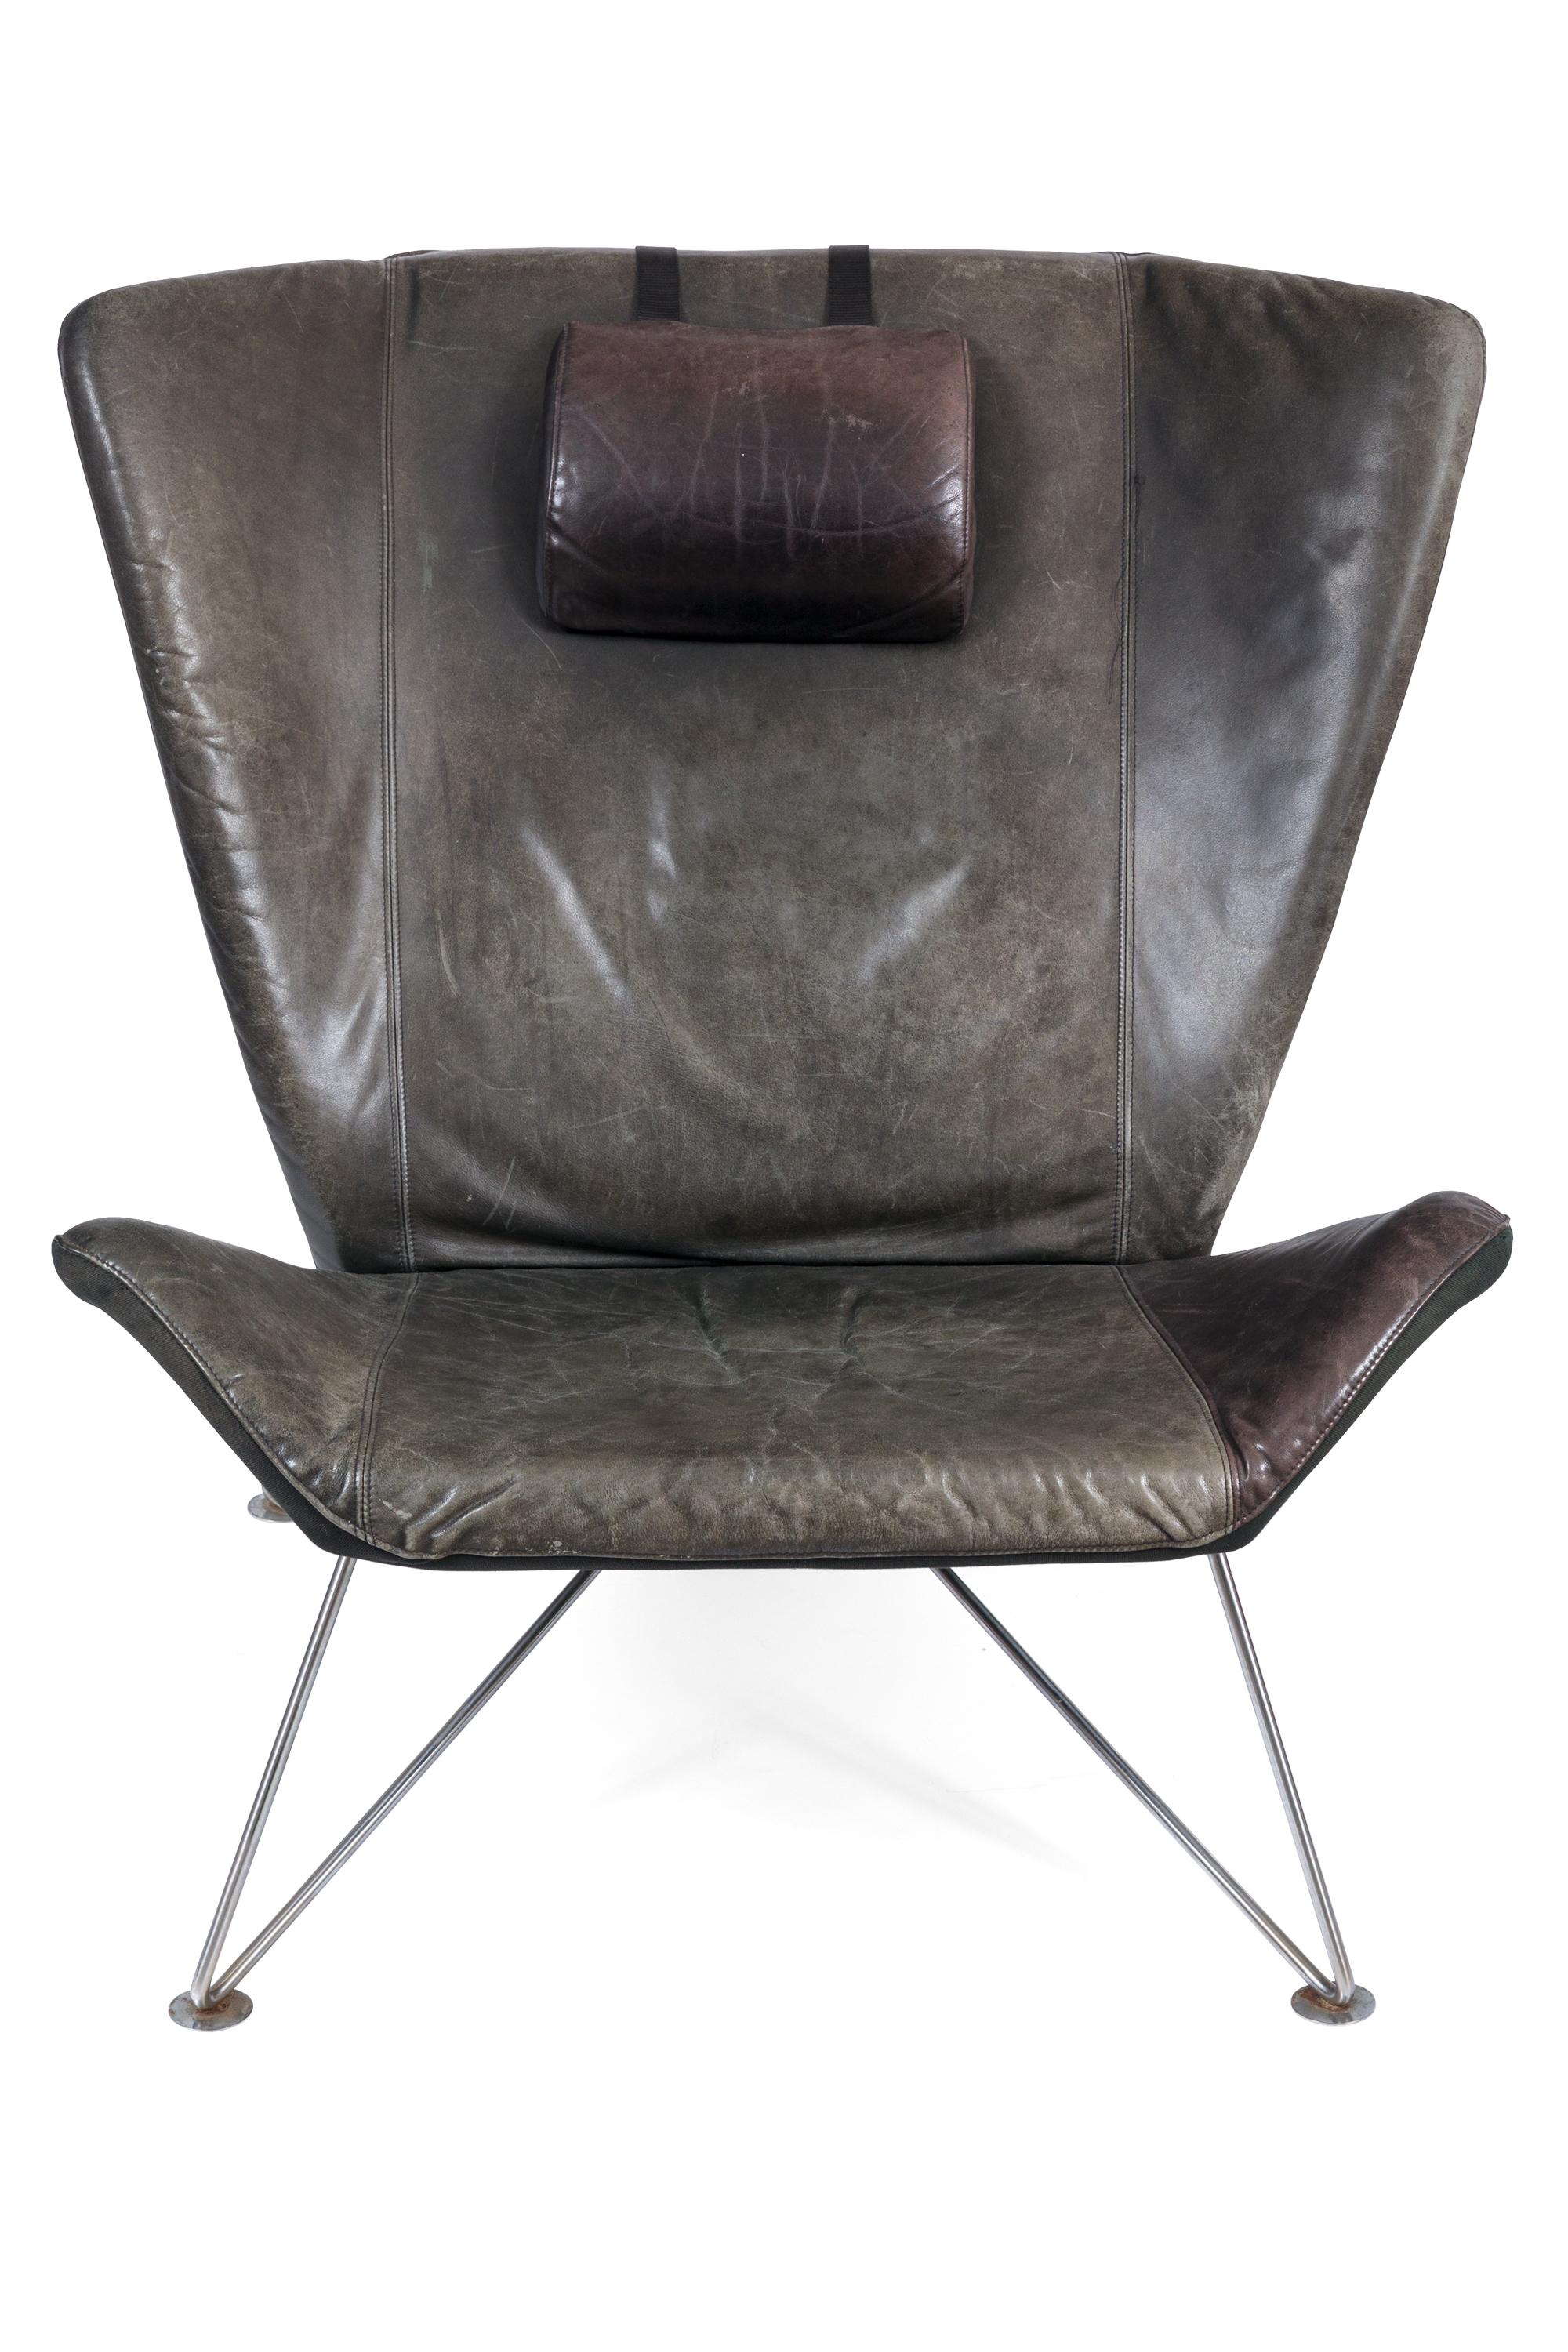 We haven't been able to identify the designer of these chairs but they are fabulous. The steel base has a great architectural design and the overall look of the chair is distinctive yet still reminiscent of many classic Scandinavian Modern chairs.